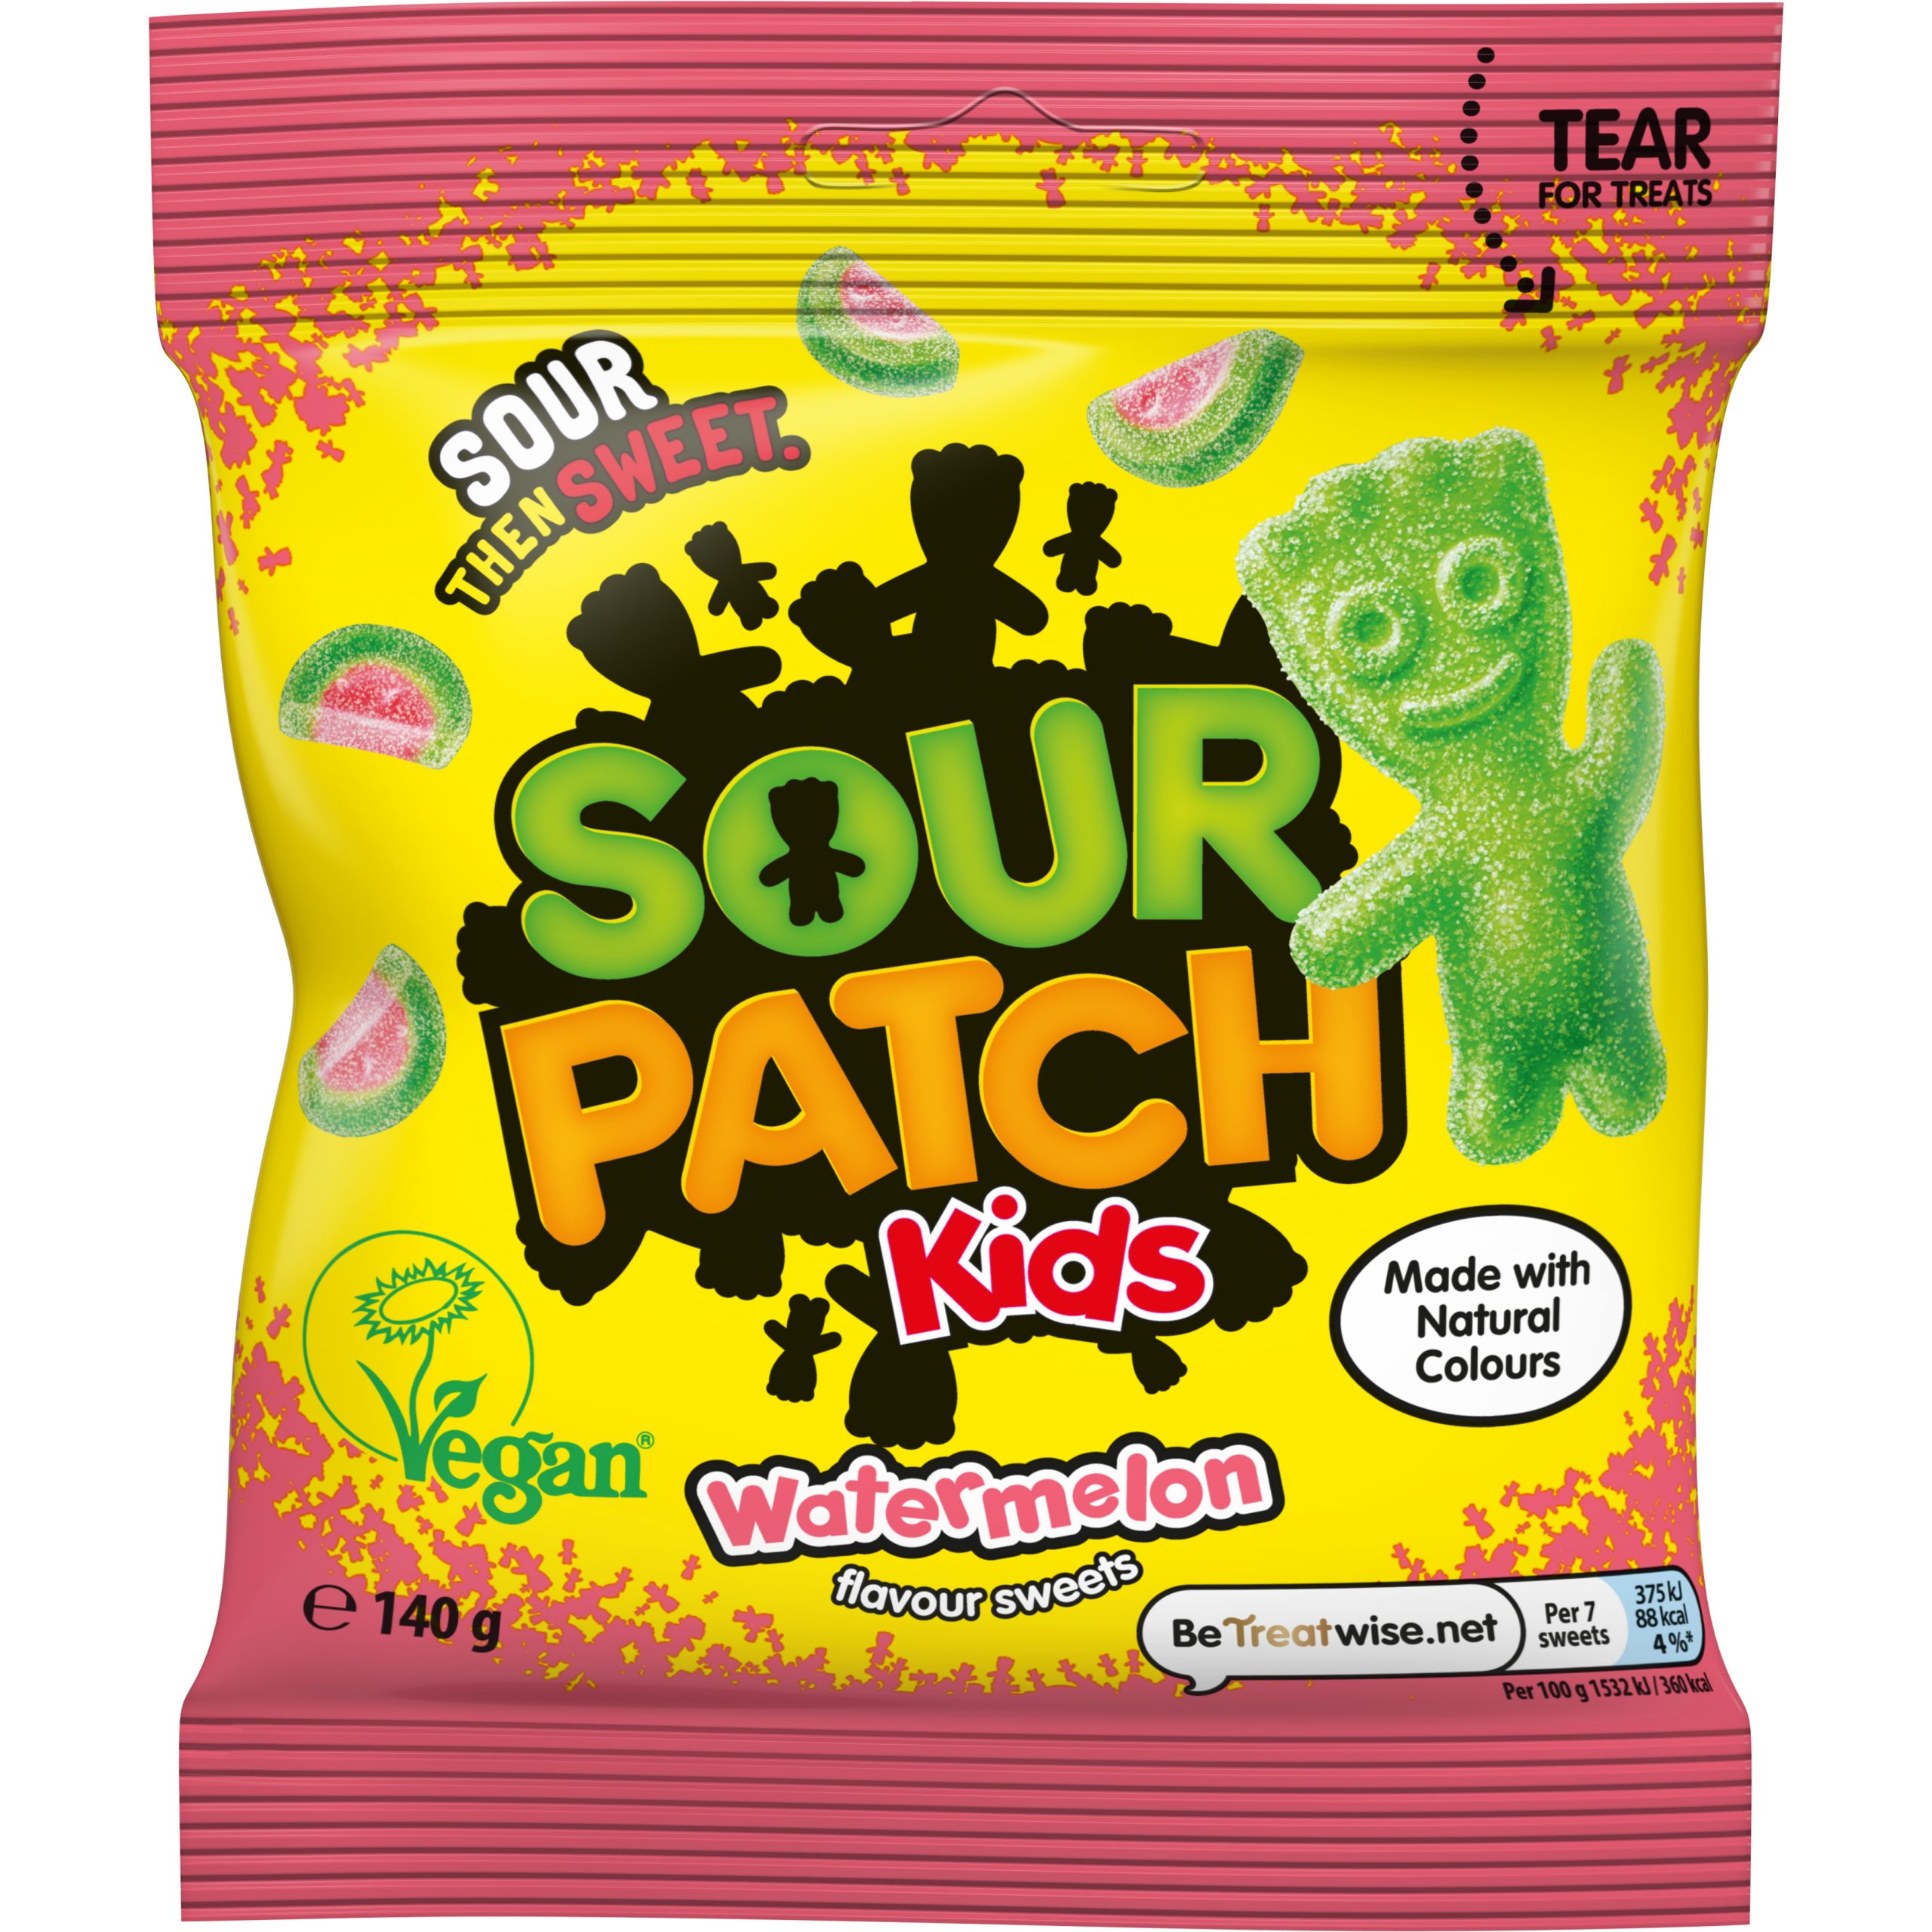 New vegan watermelon flavour from Sour Patch Kids